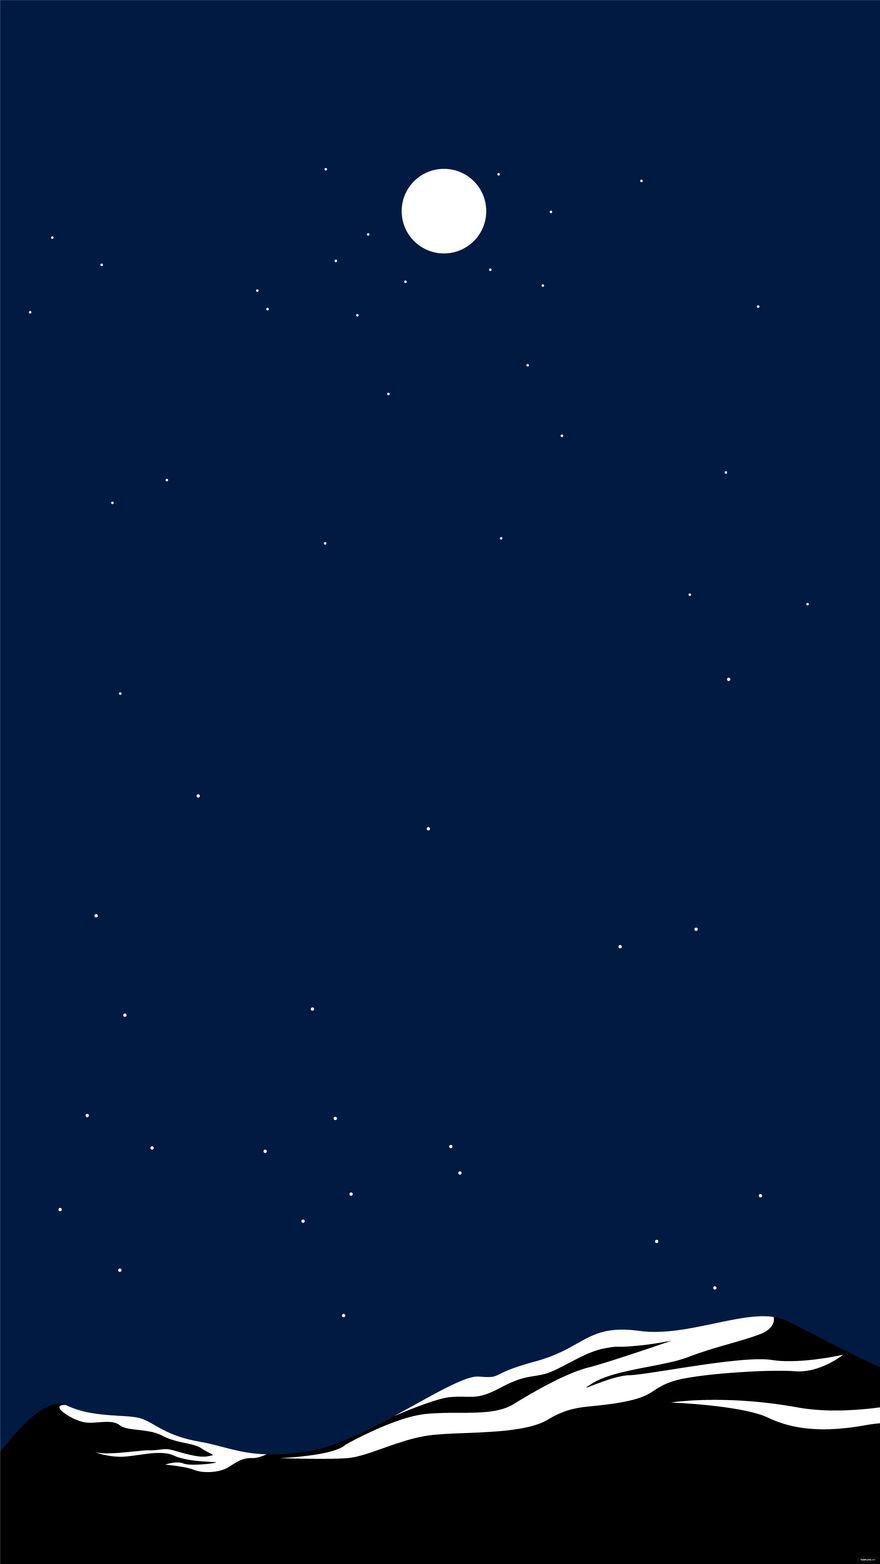 Night Sky Images  Free HD Backgrounds, PNGs, Vectors & Templates